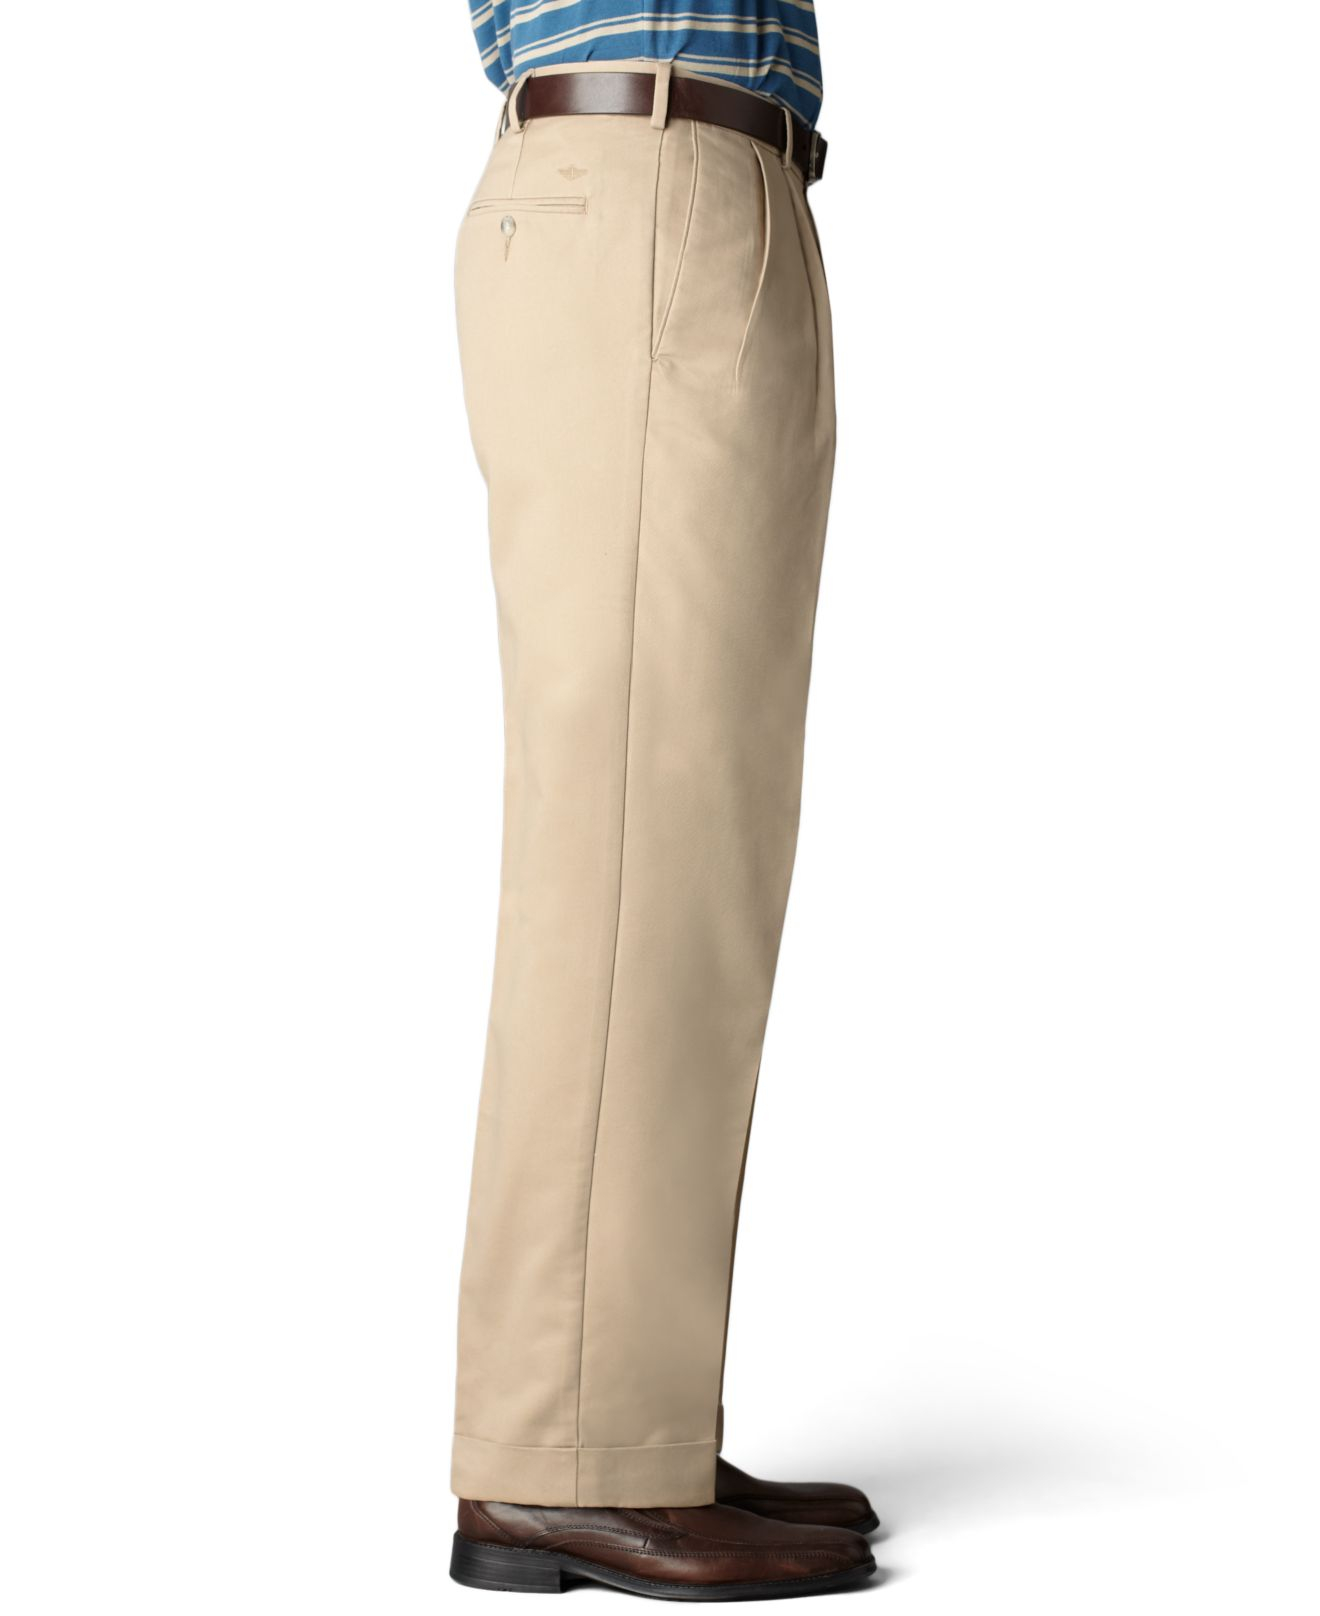 Lyst - Dockers D4 Relaxed Fit Comfort Khaki Pleated Pants in Natural ...